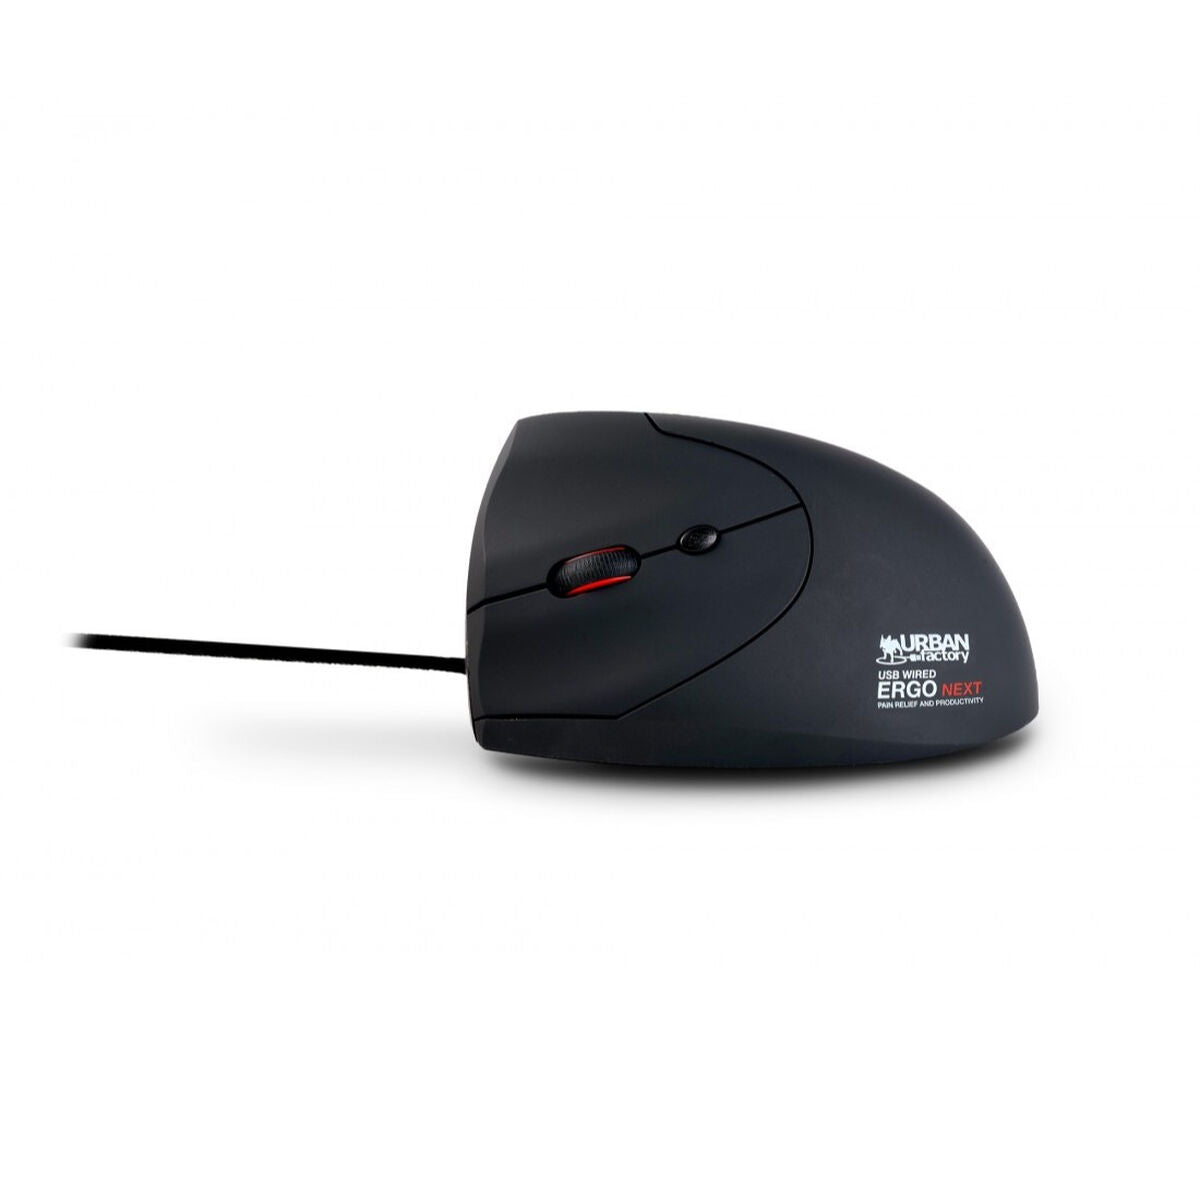 Mouse Urban Factory EML01UF-V2 Black, Urban Factory, Computing, Accessories, mouse-urban-factory-eml01uf-v2-black-1, Brand_Urban Factory, category-reference-2609, category-reference-2642, category-reference-2656, category-reference-t-19685, category-reference-t-19908, category-reference-t-21353, category-reference-t-25626, computers / peripherals, Condition_NEW, office, Price_50 - 100, Teleworking, RiotNook